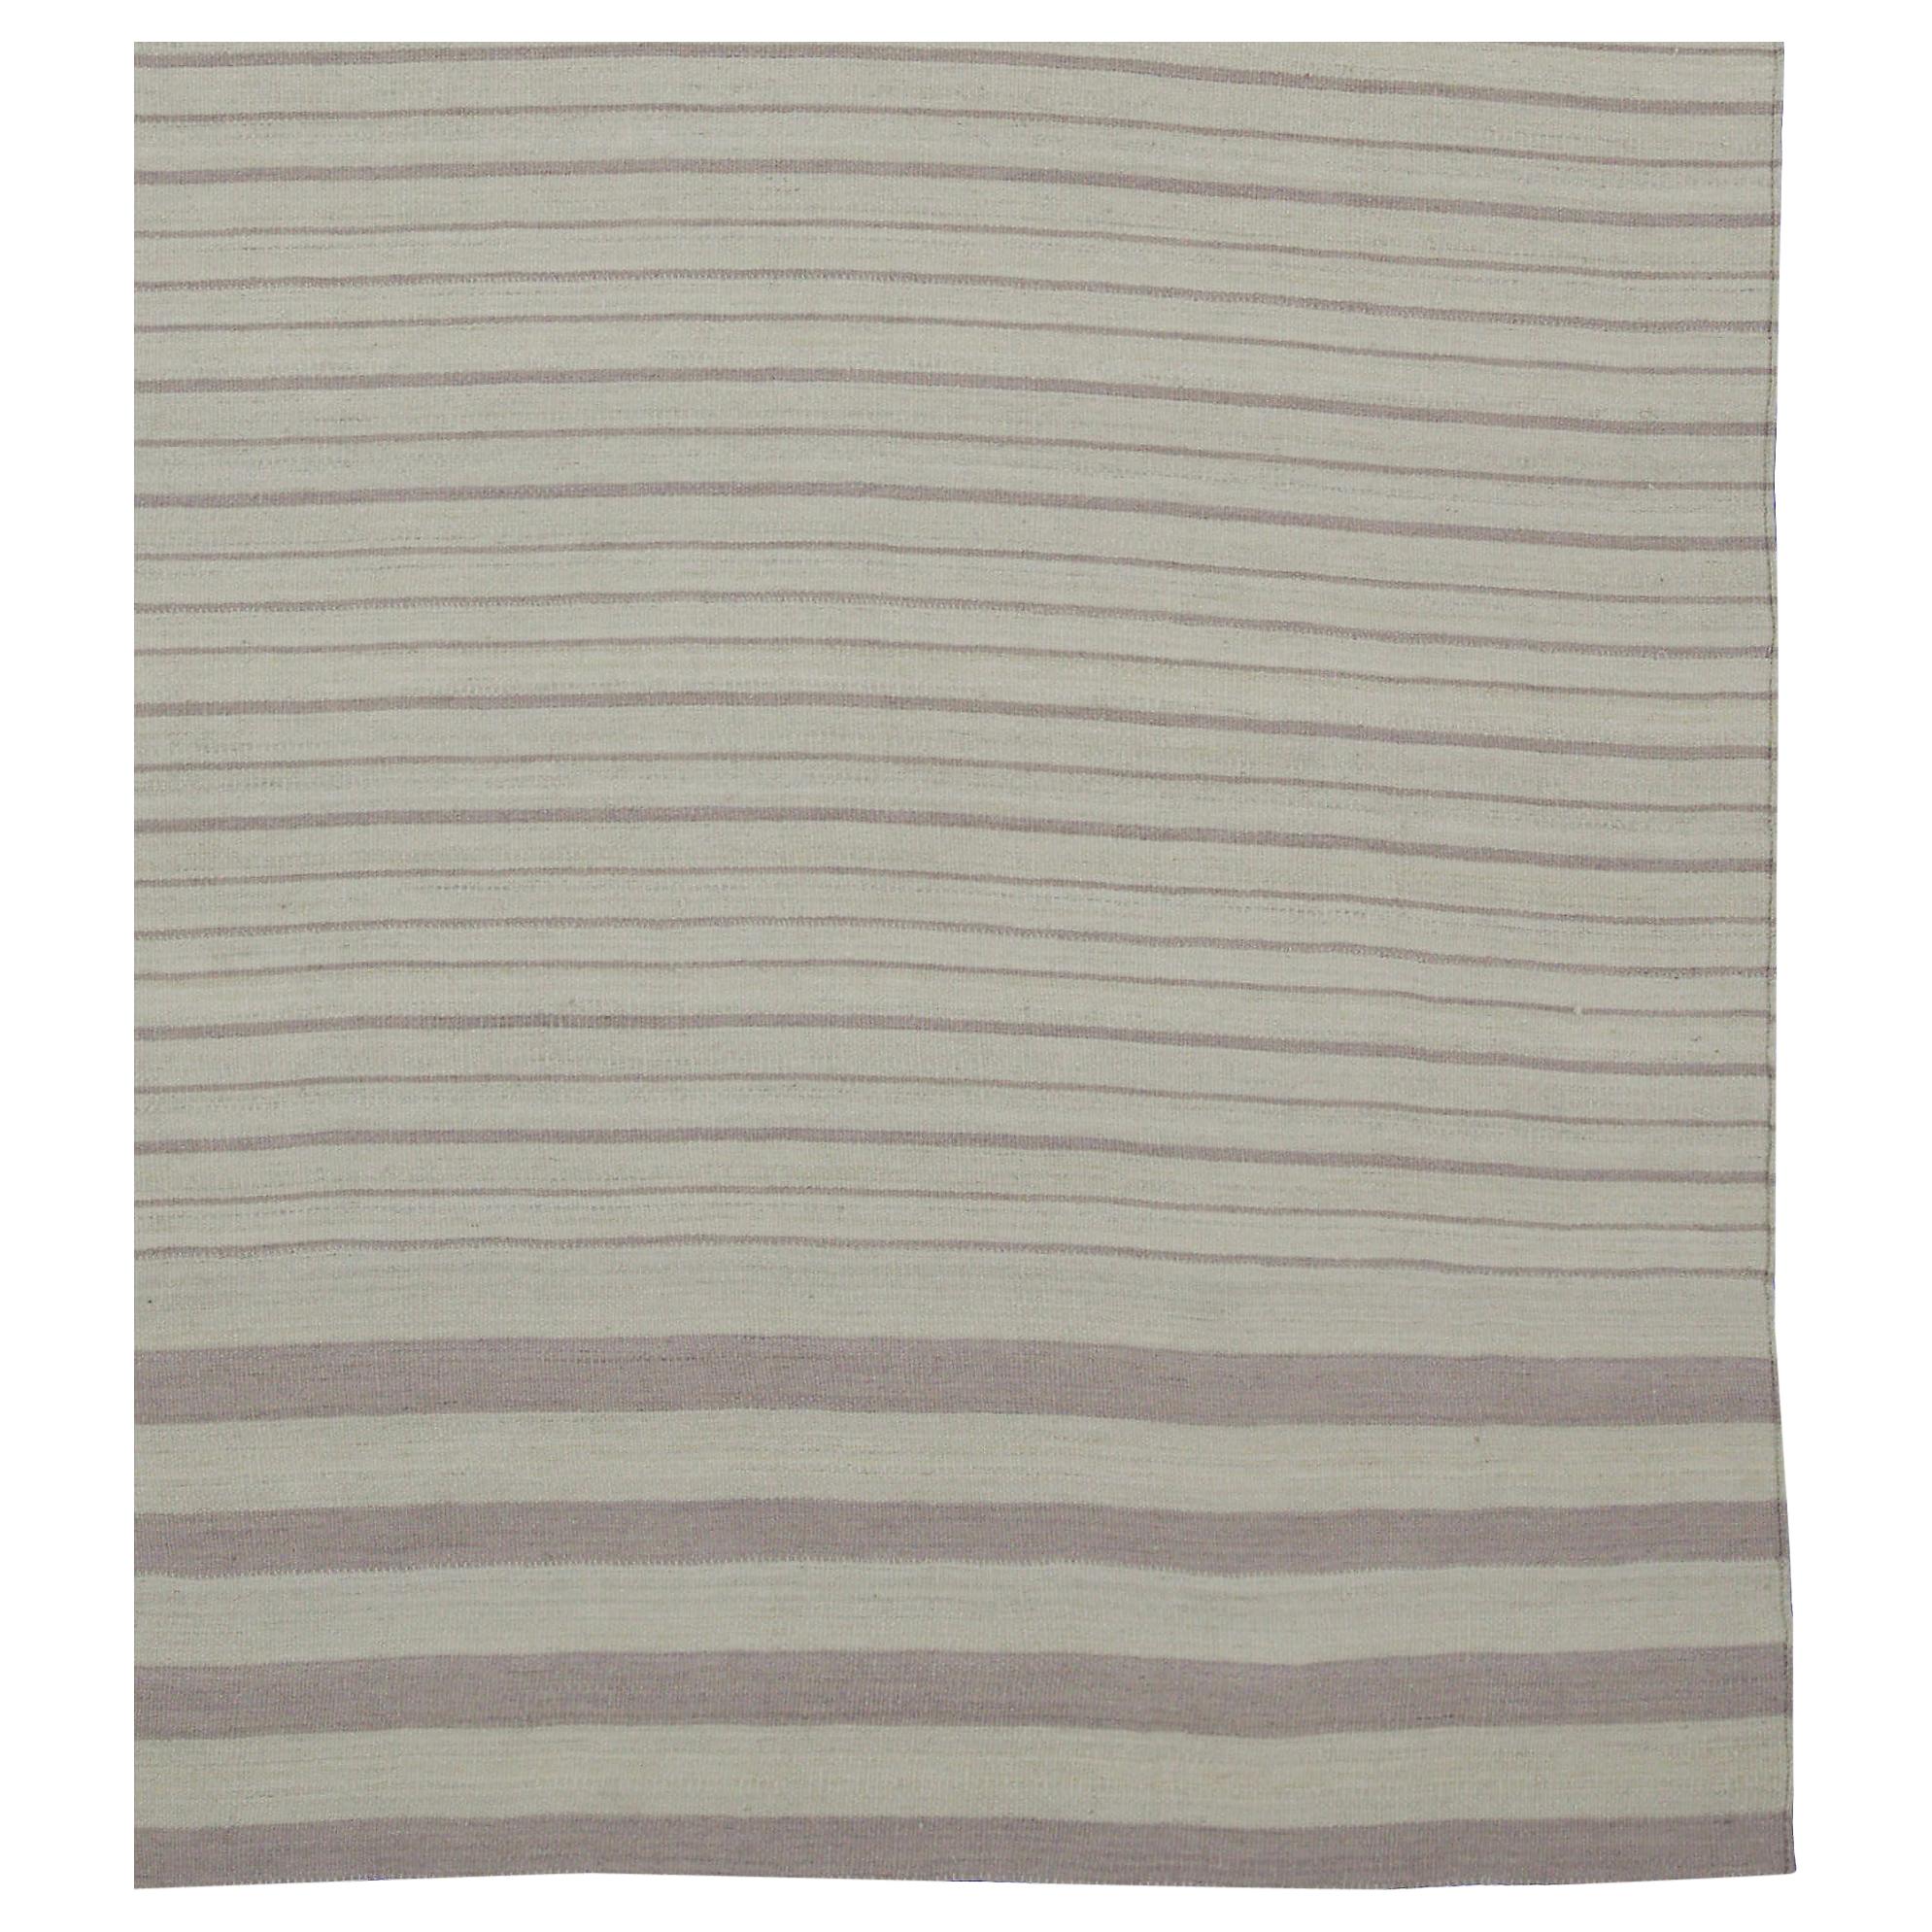 Contemporary Kilim Rug in Ivory with Gray Stripes